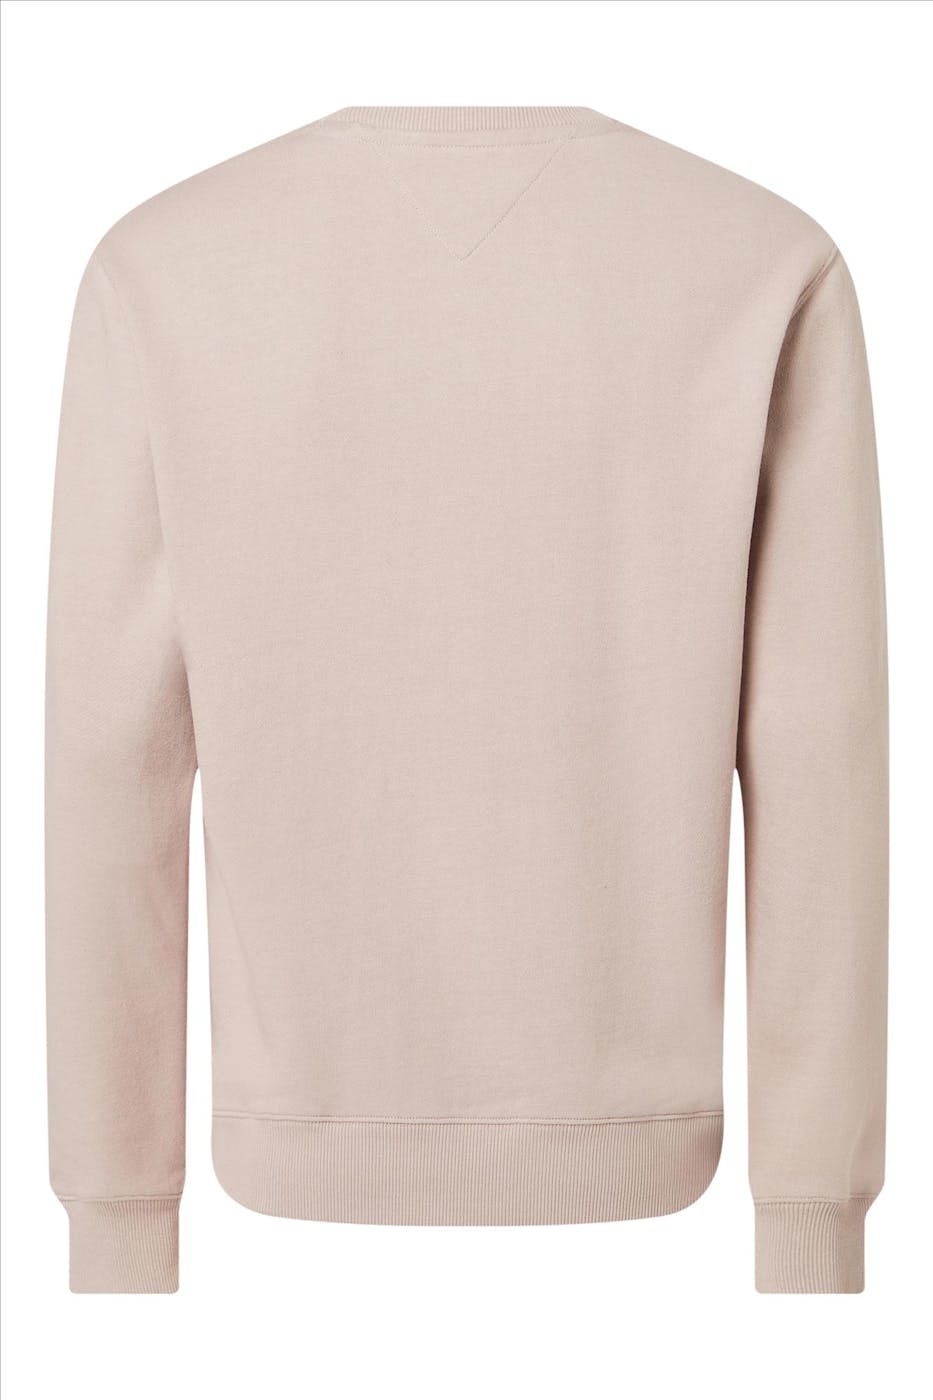 Tommy Jeans - Nude Varsity Crew sweater